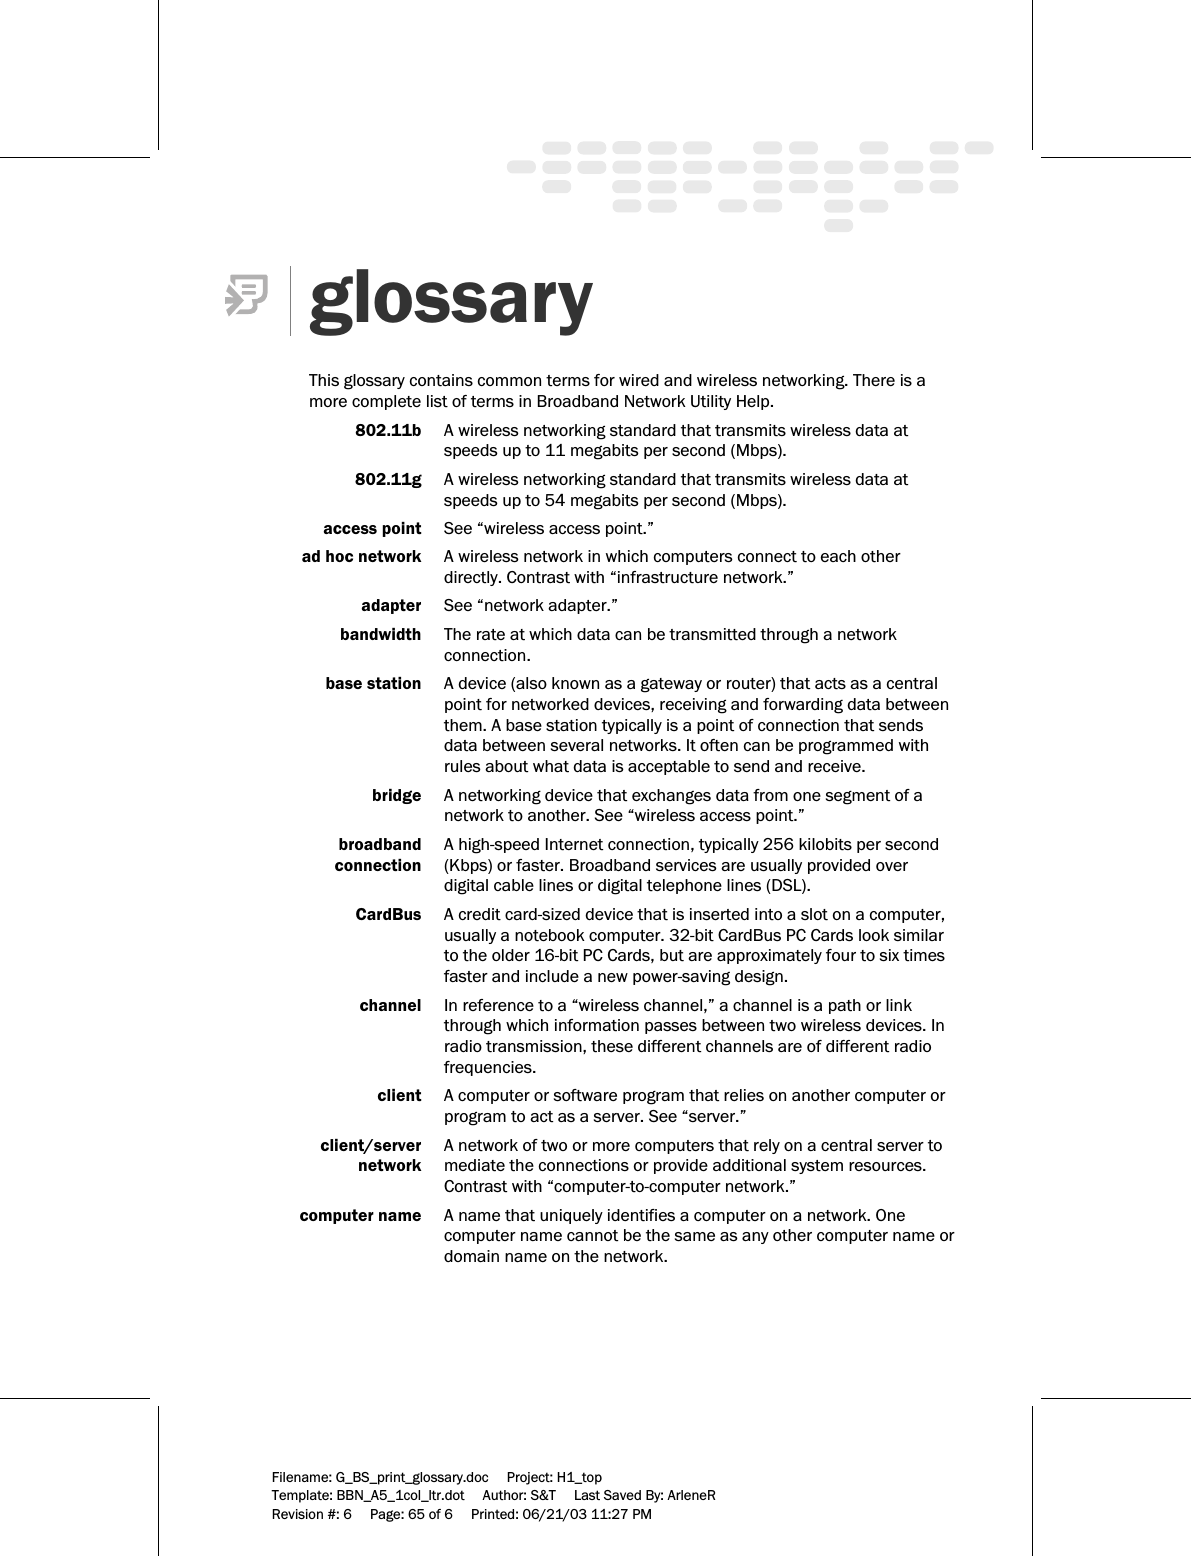     Filename: G_BS_print_glossary.doc     Project: H1_top    Template: BBN_A5_1col_ltr.dot     Author: S&amp;T     Last Saved By: ArleneR Revision #: 6     Page: 65 of 6     Printed: 06/21/03 11:27 PM   glossary  This glossary contains common terms for wired and wireless networking. There is a more complete list of terms in Broadband Network Utility Help.    802.11b  A wireless networking standard that transmits wireless data at speeds up to 11 megabits per second (Mbps).   802.11g  A wireless networking standard that transmits wireless data at speeds up to 54 megabits per second (Mbps).   access point  See “wireless access point.”   ad hoc network  A wireless network in which computers connect to each other directly. Contrast with “infrastructure network.”  adapter  See “network adapter.”     bandwidth  The rate at which data can be transmitted through a network connection.   base station  A device (also known as a gateway or router) that acts as a central point for networked devices, receiving and forwarding data between them. A base station typically is a point of connection that sends data between several networks. It often can be programmed with rules about what data is acceptable to send and receive.  bridge  A networking device that exchanges data from one segment of a network to another. See “wireless access point.”  broadband   A high-speed Internet connection, typically 256 kilobits per second   connection  (Kbps) or faster. Broadband services are usually provided over digital cable lines or digital telephone lines (DSL).   CardBus  A credit card-sized device that is inserted into a slot on a computer, usually a notebook computer. 32-bit CardBus PC Cards look similar to the older 16-bit PC Cards, but are approximately four to six times faster and include a new power-saving design.    channel  In reference to a “wireless channel,” a channel is a path or link through which information passes between two wireless devices. In radio transmission, these different channels are of different radio frequencies.   client  A computer or software program that relies on another computer or program to act as a server. See “server.”  client/server   A network of two or more computers that rely on a central server to   network  mediate the connections or provide additional system resources. Contrast with “computer-to-computer network.”  computer name  A name that uniquely identifies a computer on a network. One computer name cannot be the same as any other computer name or domain name on the network.  